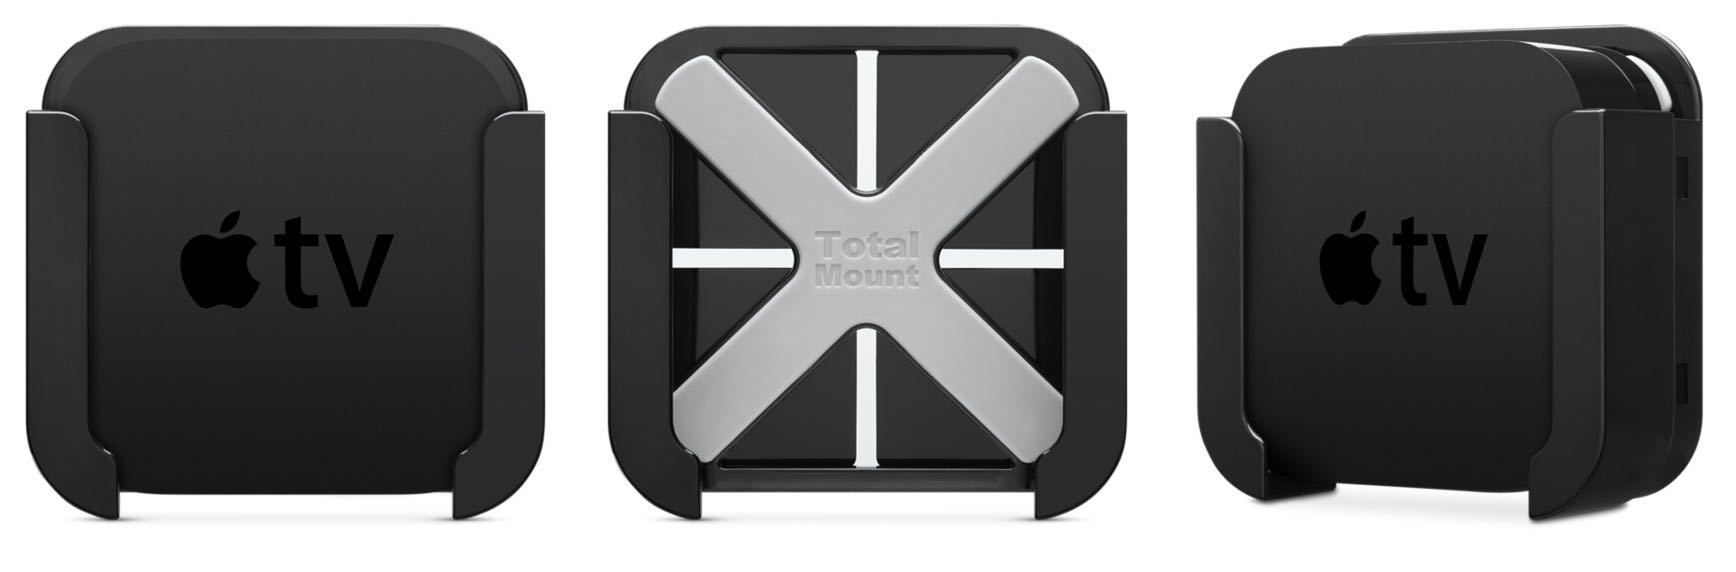 Innovelis Totalmount Pro for Apple TV Now Available in the Apple Store